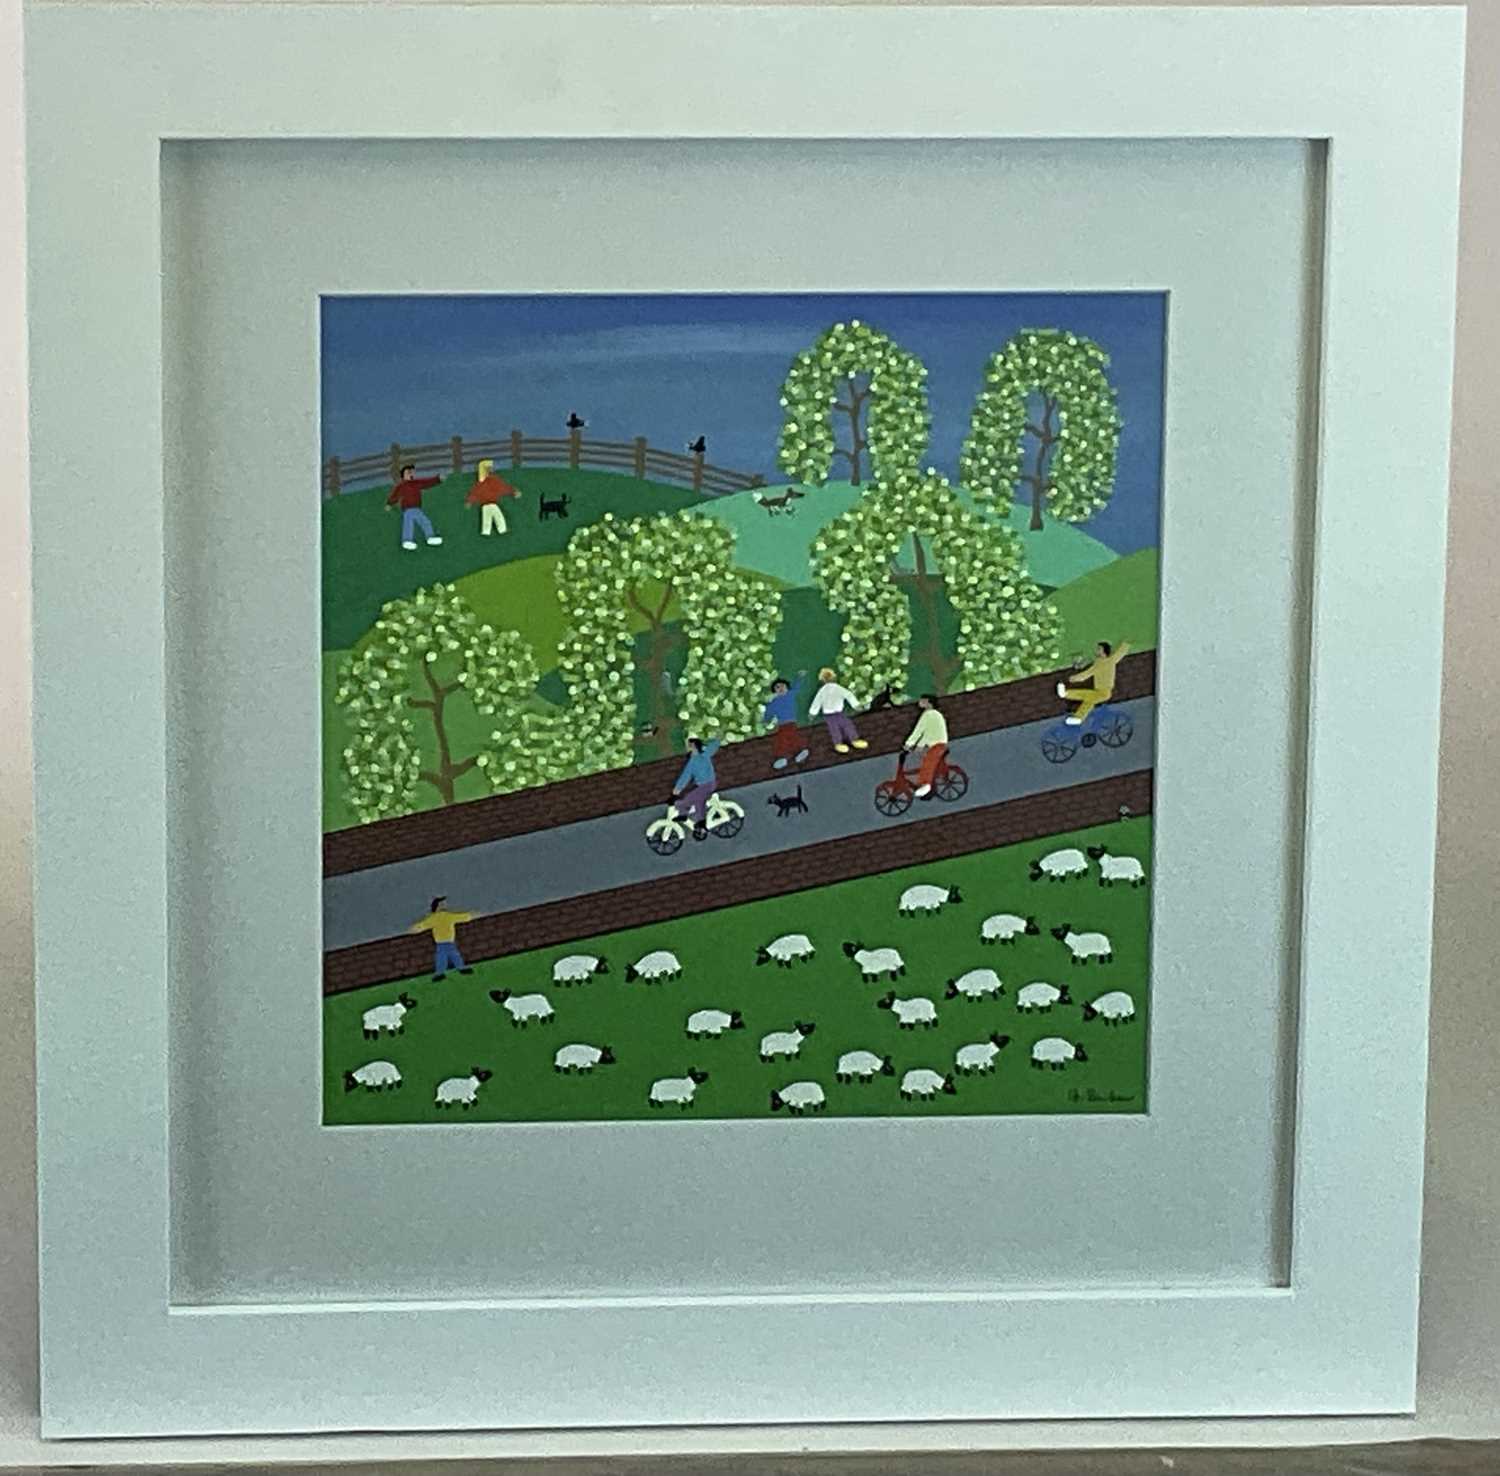 † GORDON BARKER; acrylic on card, landscape with figures cycling, signed, 28 x 28cm, framed and